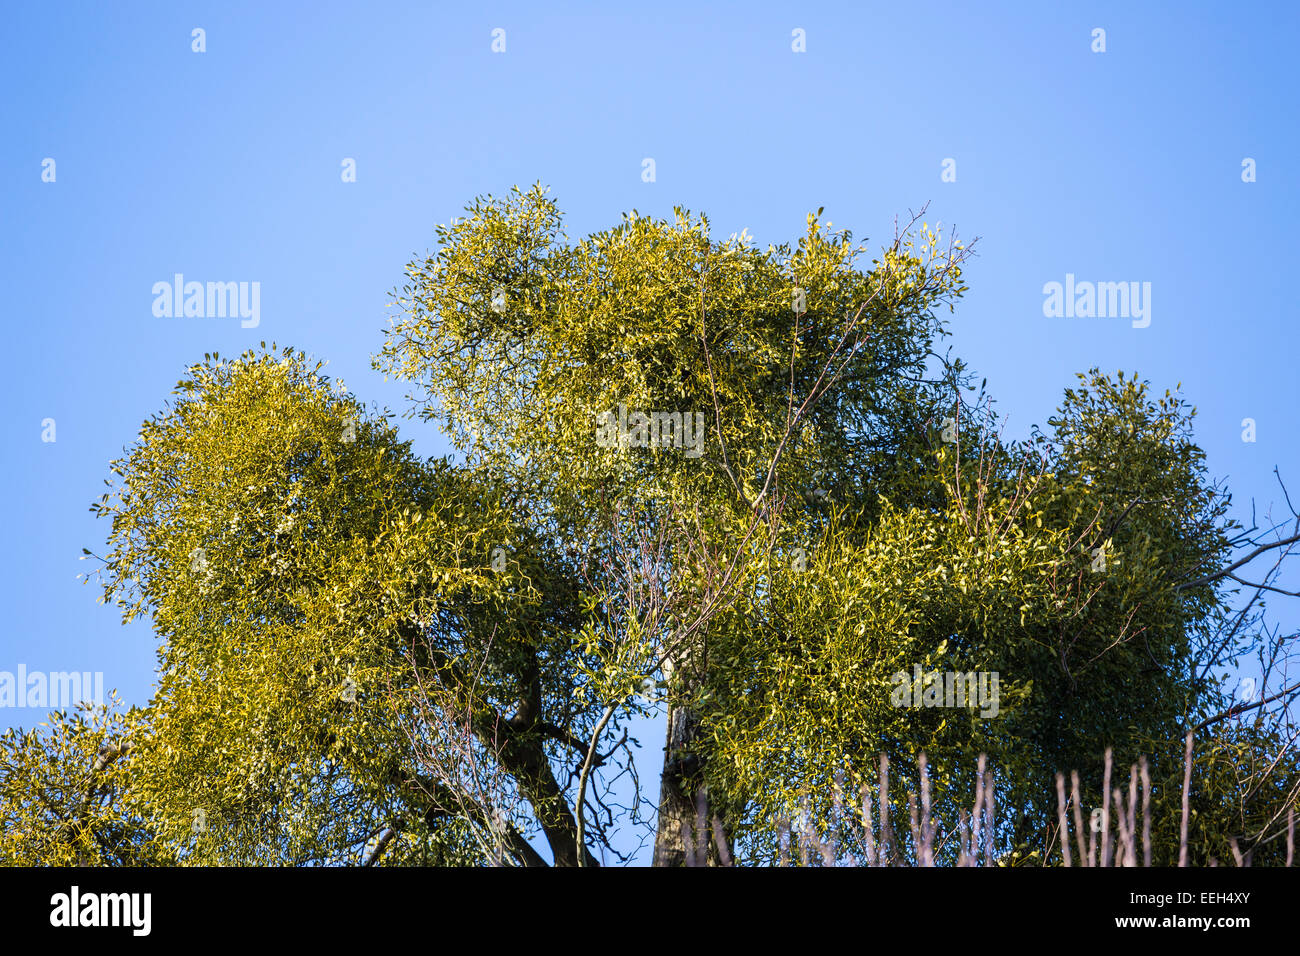 Large green clumps of European mistletoe, Viscum album, growing at the top of a tree in southern England, with a blue sky background Stock Photo